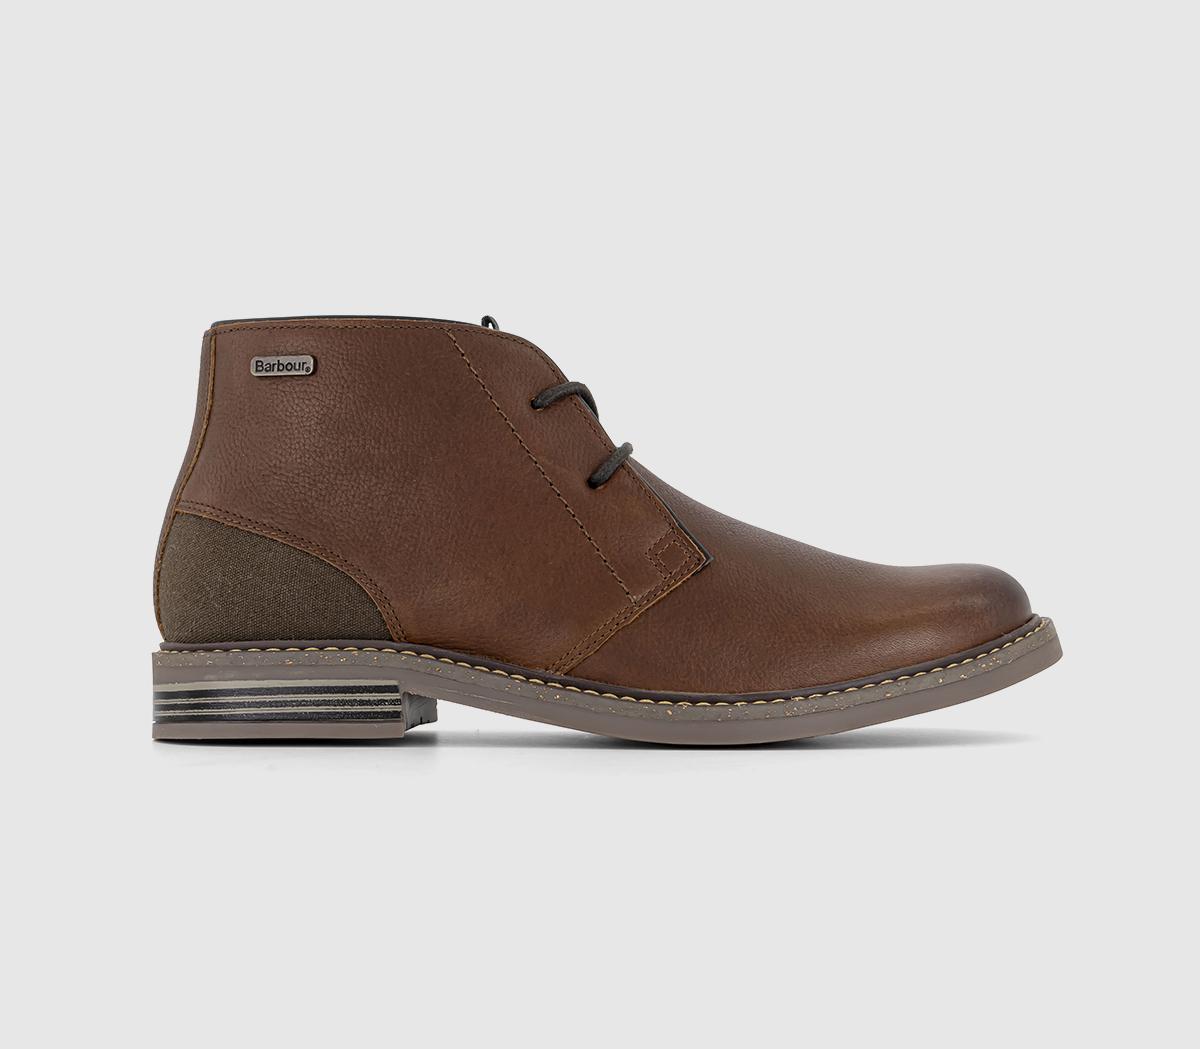 Mens Barbour Readhead Chukka Boots Teak – OFFCUTS SHOES by OFFICE